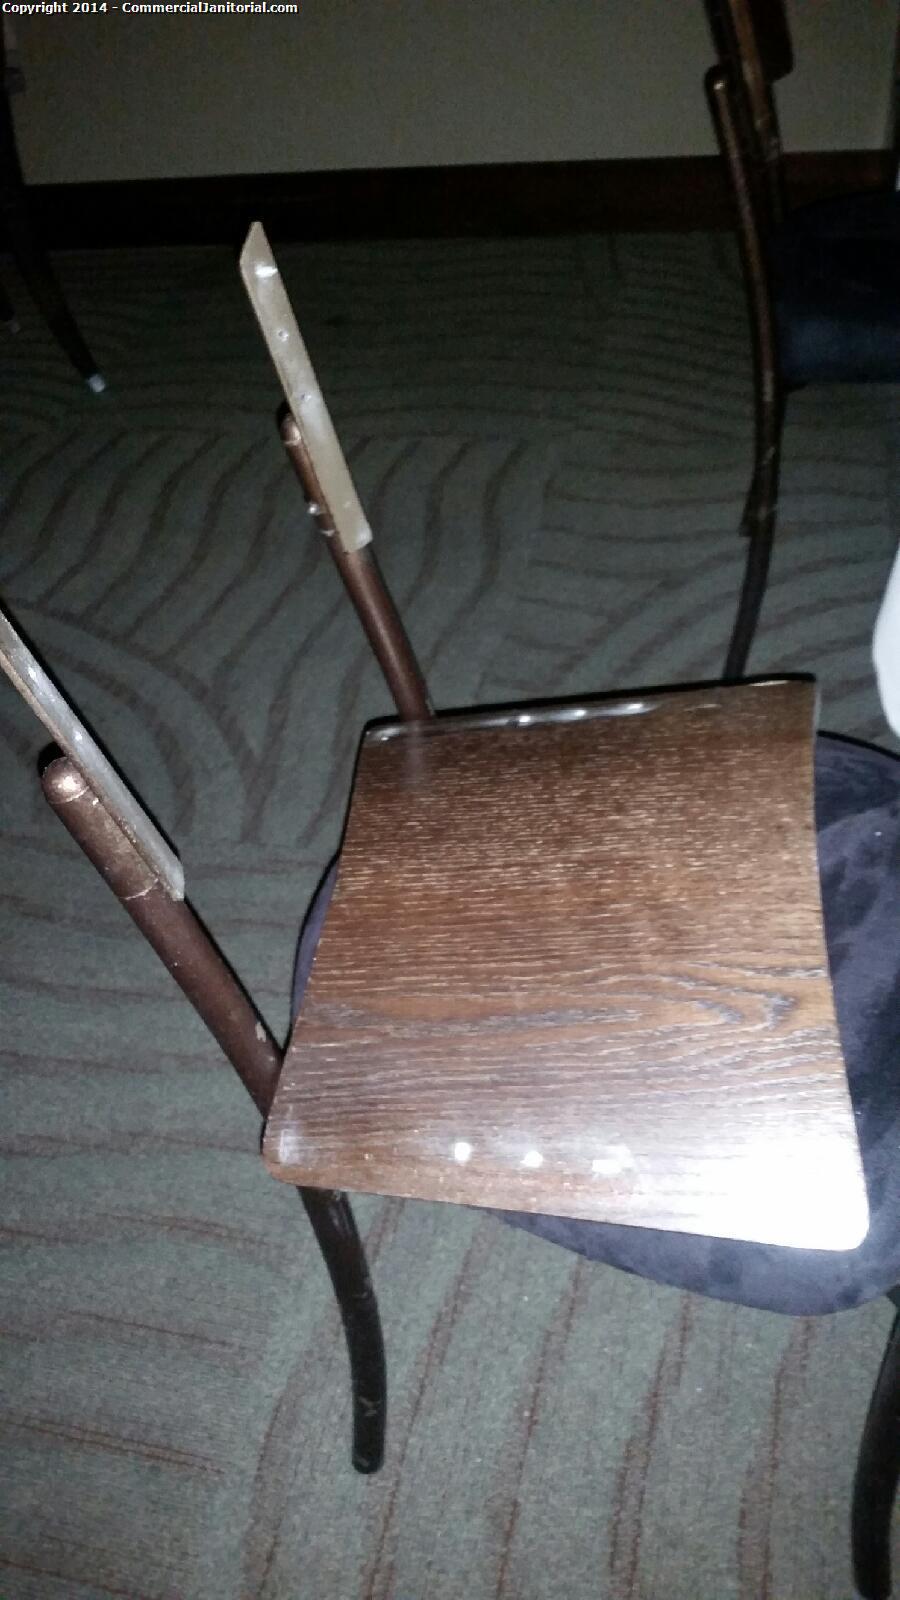 While getting ready to clean all carpeted areas , we found a broken chair which needs to be thrown out



